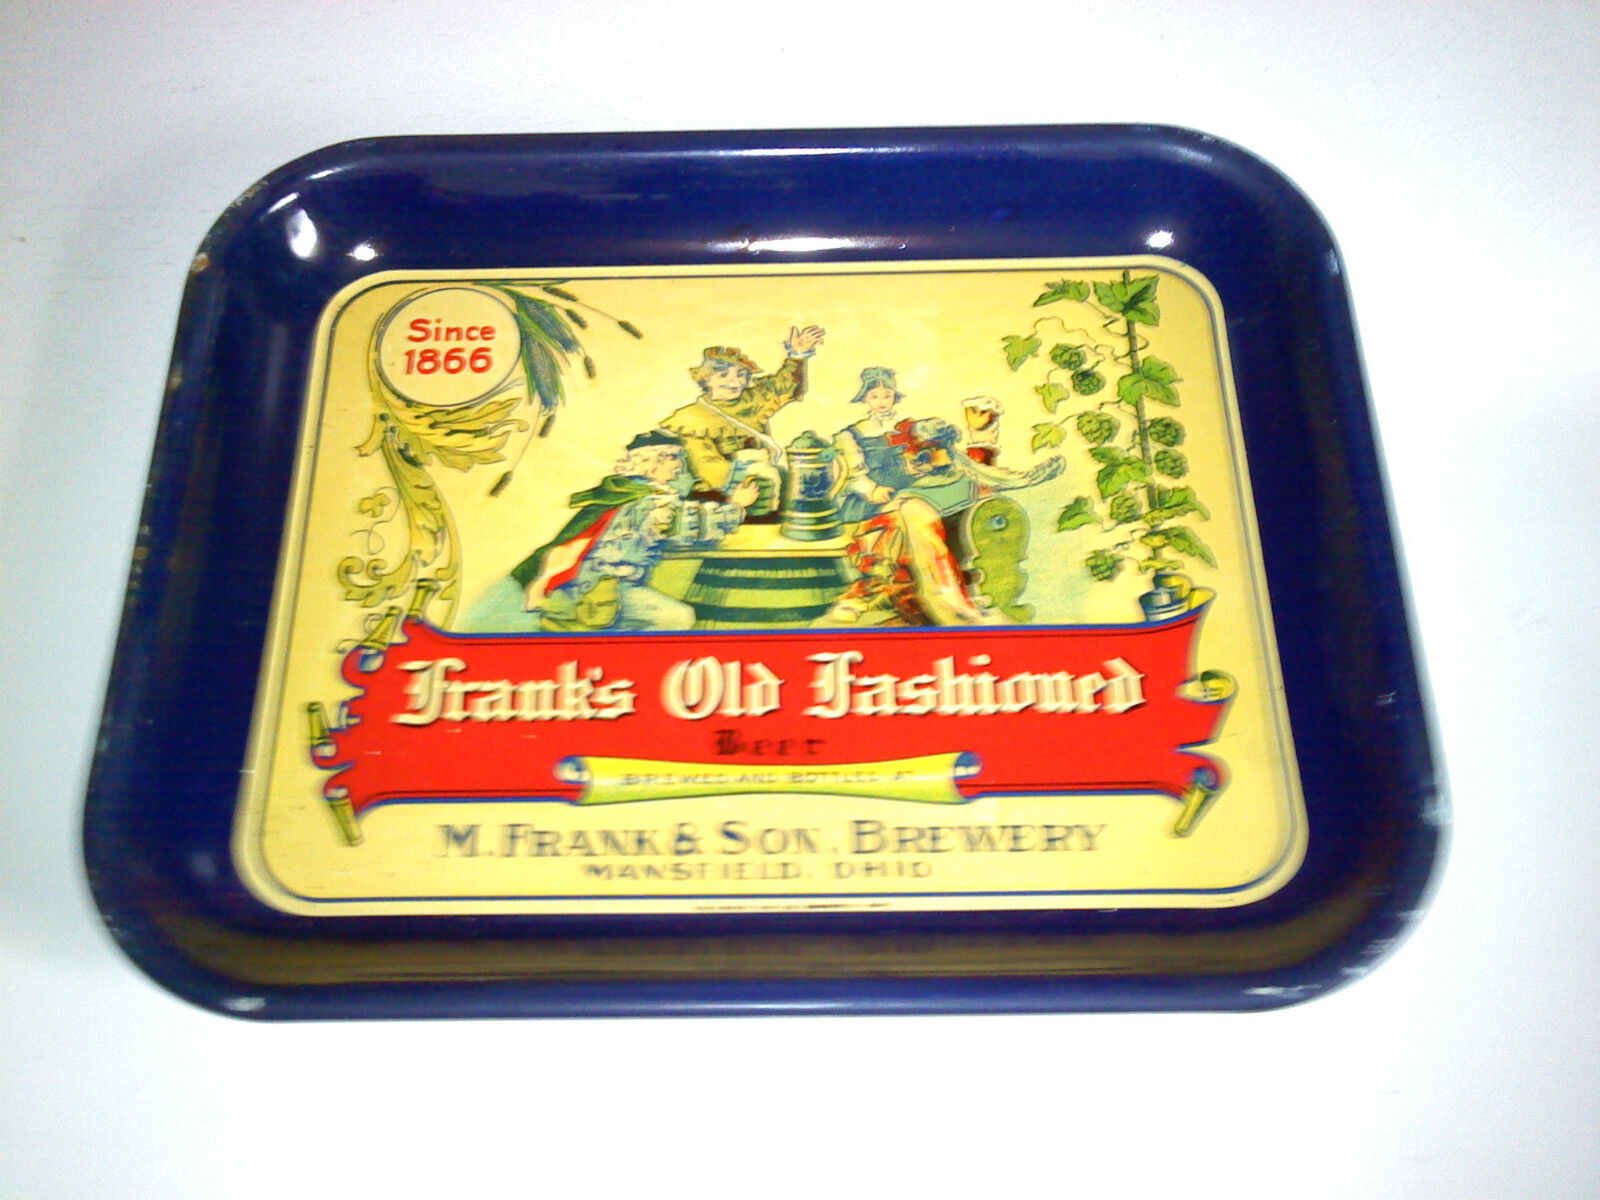 vintage M Frank and Sons Brewery tray mansfield ohio